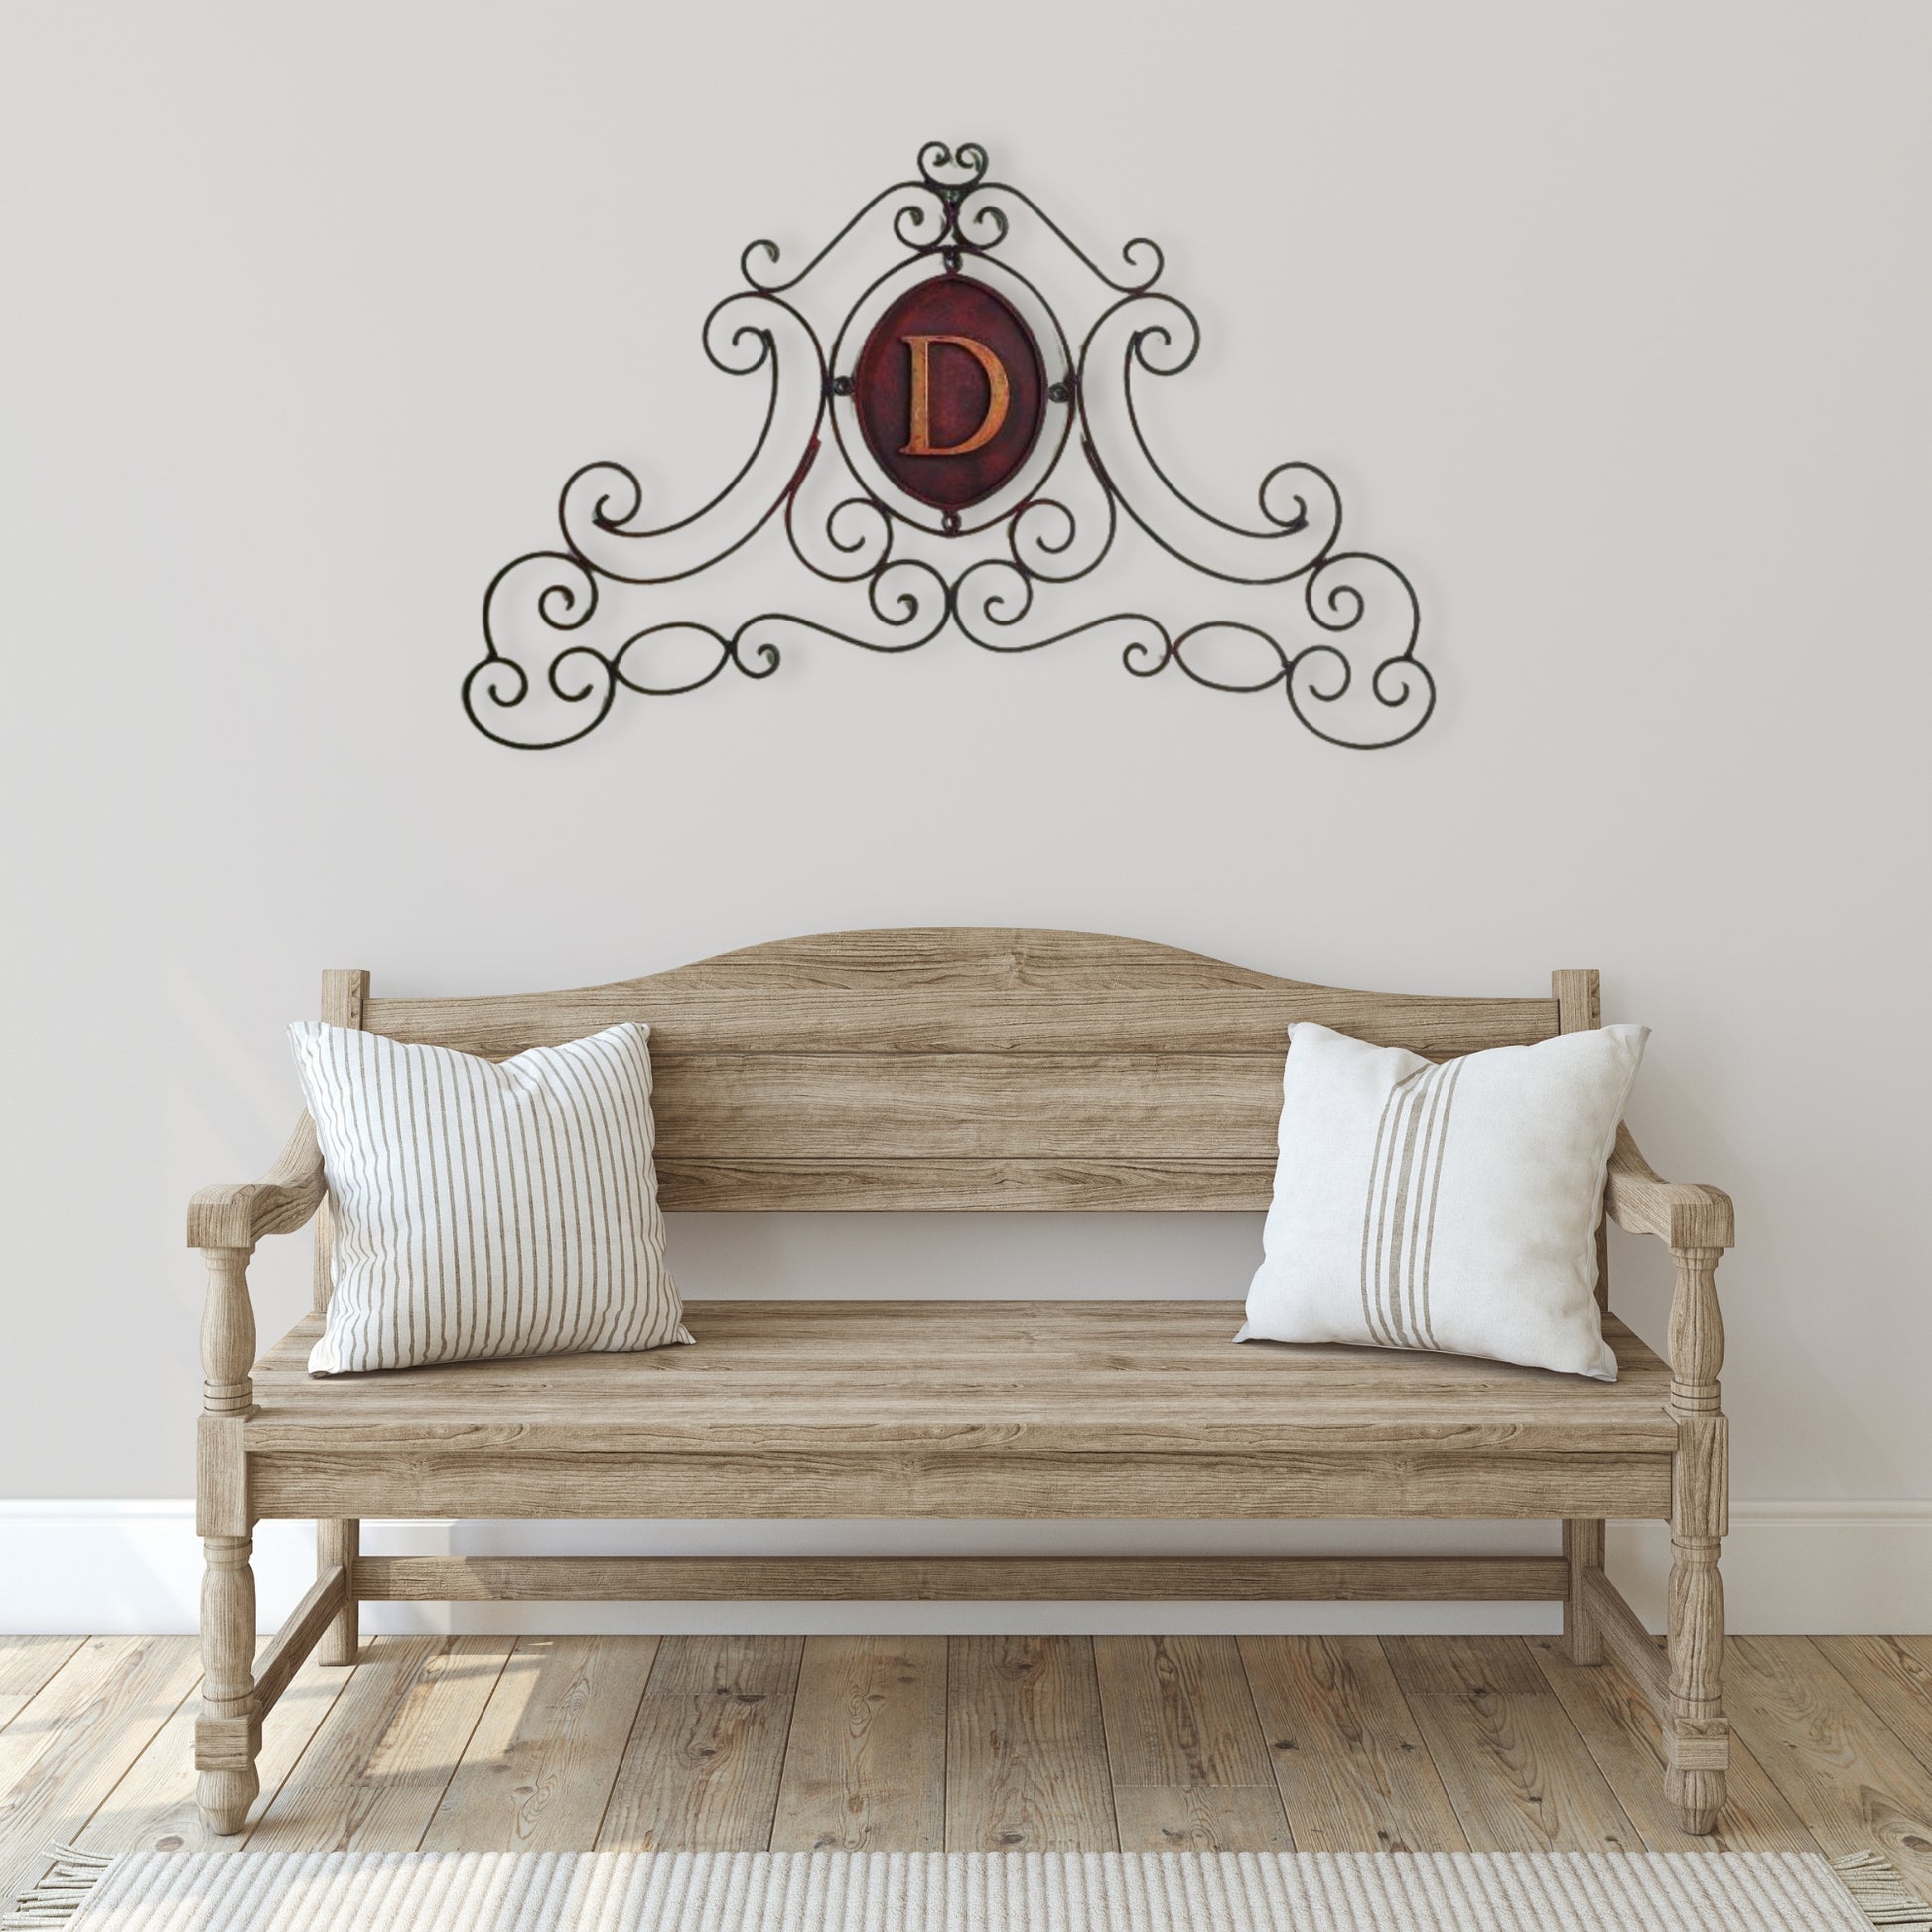 Monogrammed Iron Scroll Wall Grille - Monogram Wall Decor | Estate Quality Home Decor | Personalized Wall Decor | Shown with the Monogram "D" | Iron finished in a antique brown with Italian gold 5" monogram shown over large wood bench | INSIDE OUT | InsideOutCatalog.com